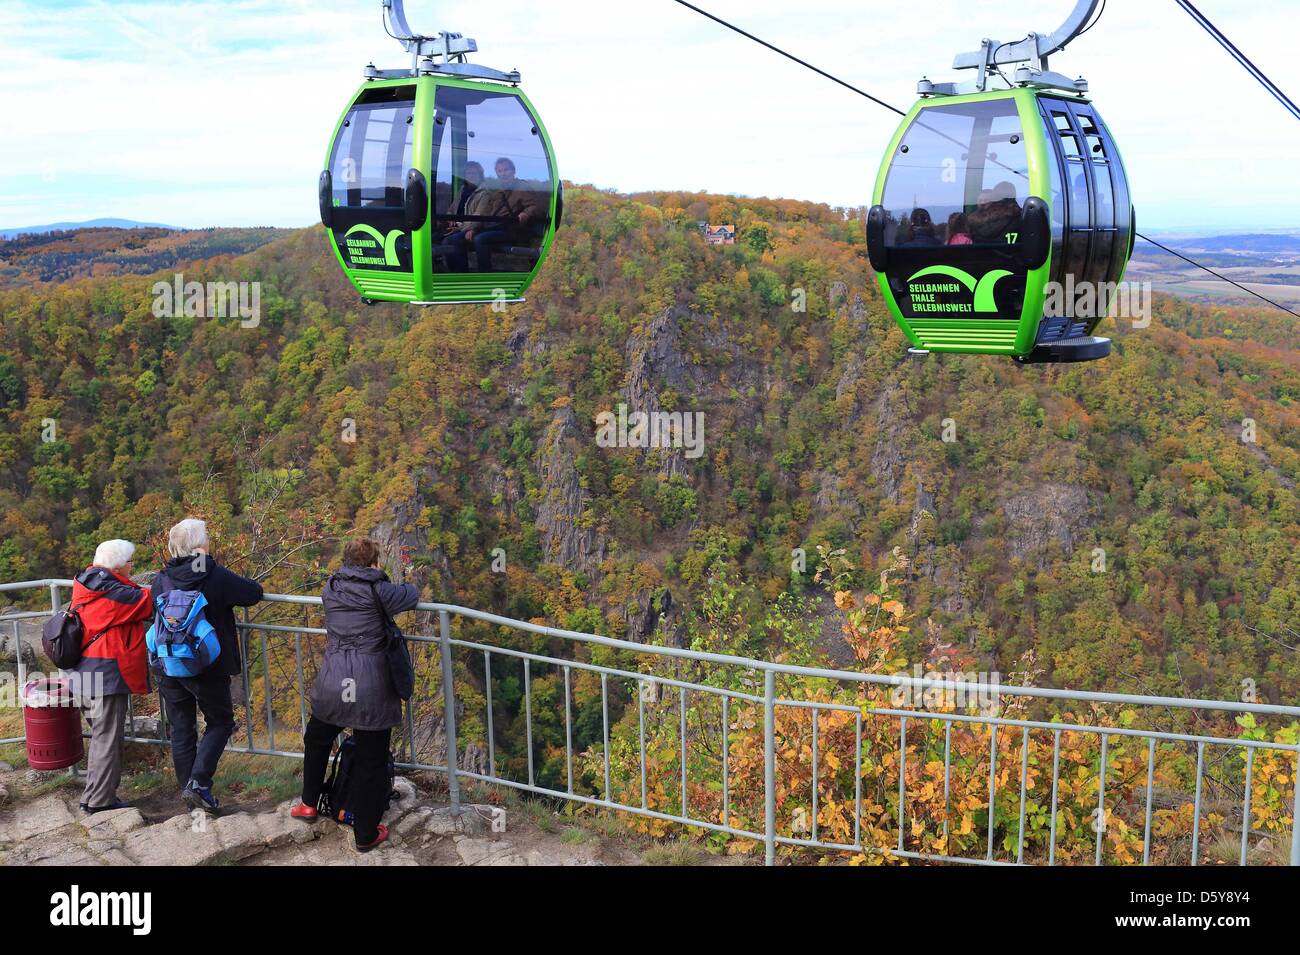 Cabins of the Thale GmbH cable car travel to Witch Dance Square (Hexentanzplatz) in Thale, Germany, 18 October 2012. 10 of the 21 cabins are fitted with panorama windows as well as a glass bottom offering good views. The ride takes from four to eight minutes to climb to a height of 244 meters from valley to mountain station. Photo: Jens Wolf Stock Photo